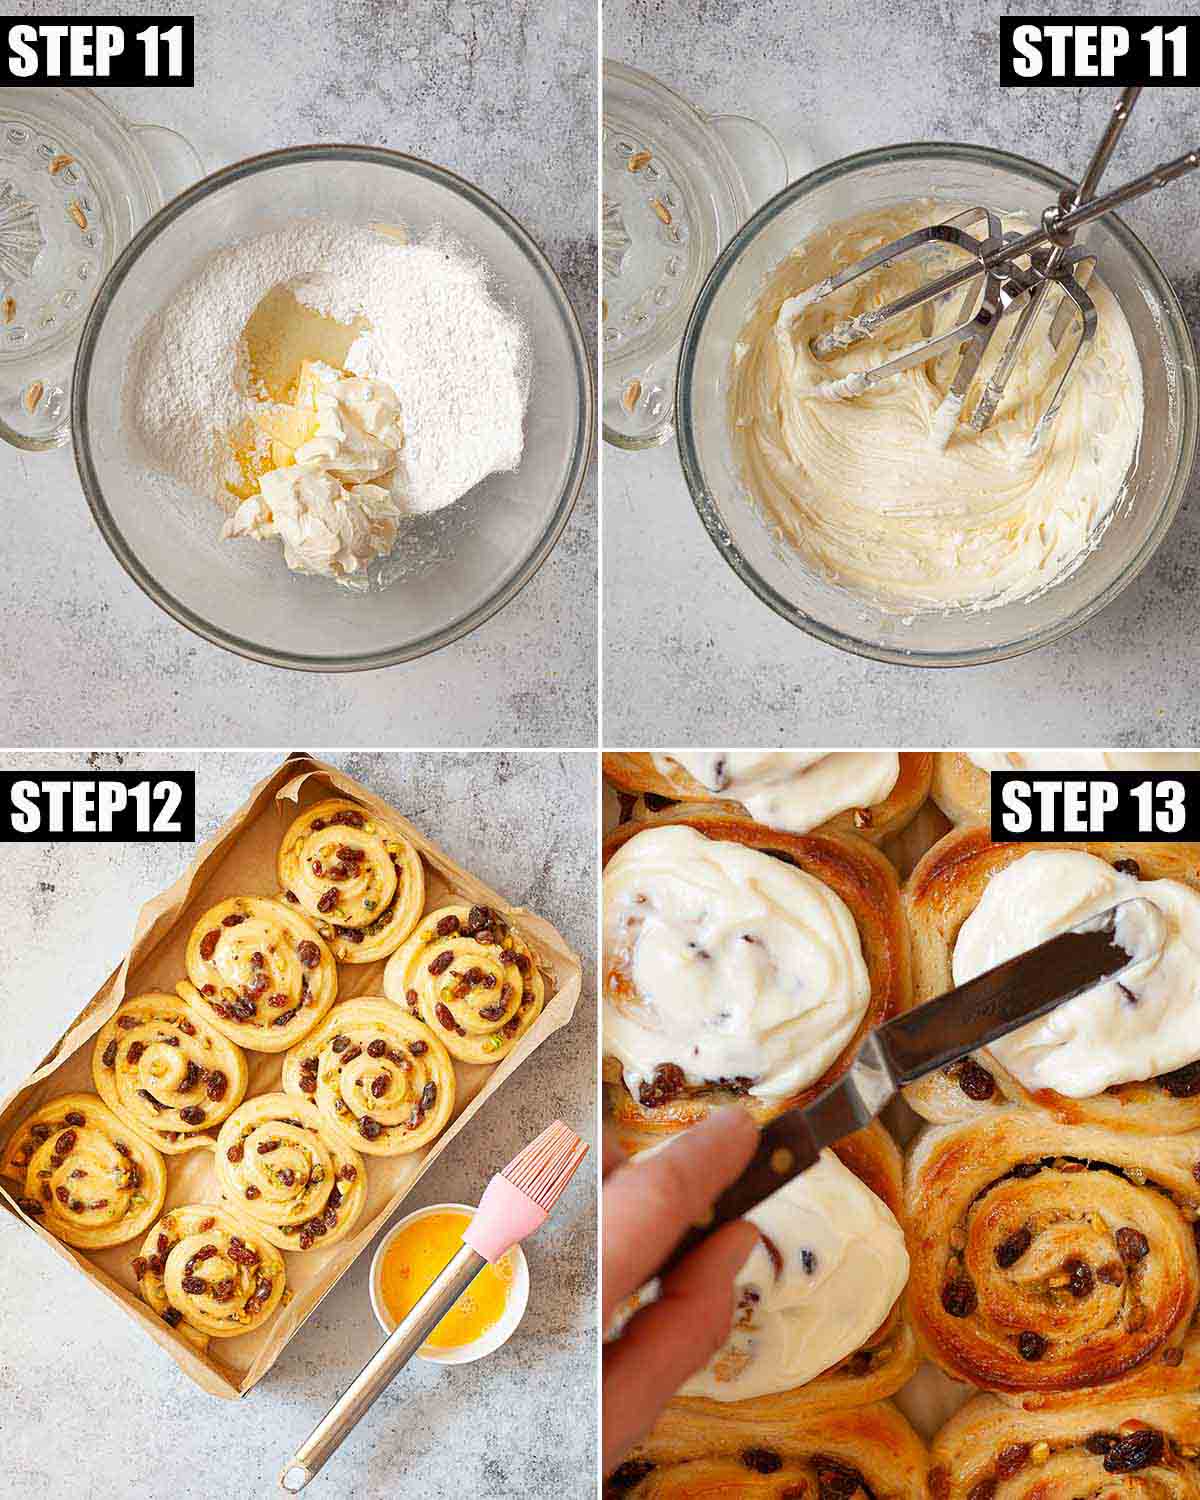 Collage of images showing lemon cream cheese frosting being made and spread on buns.